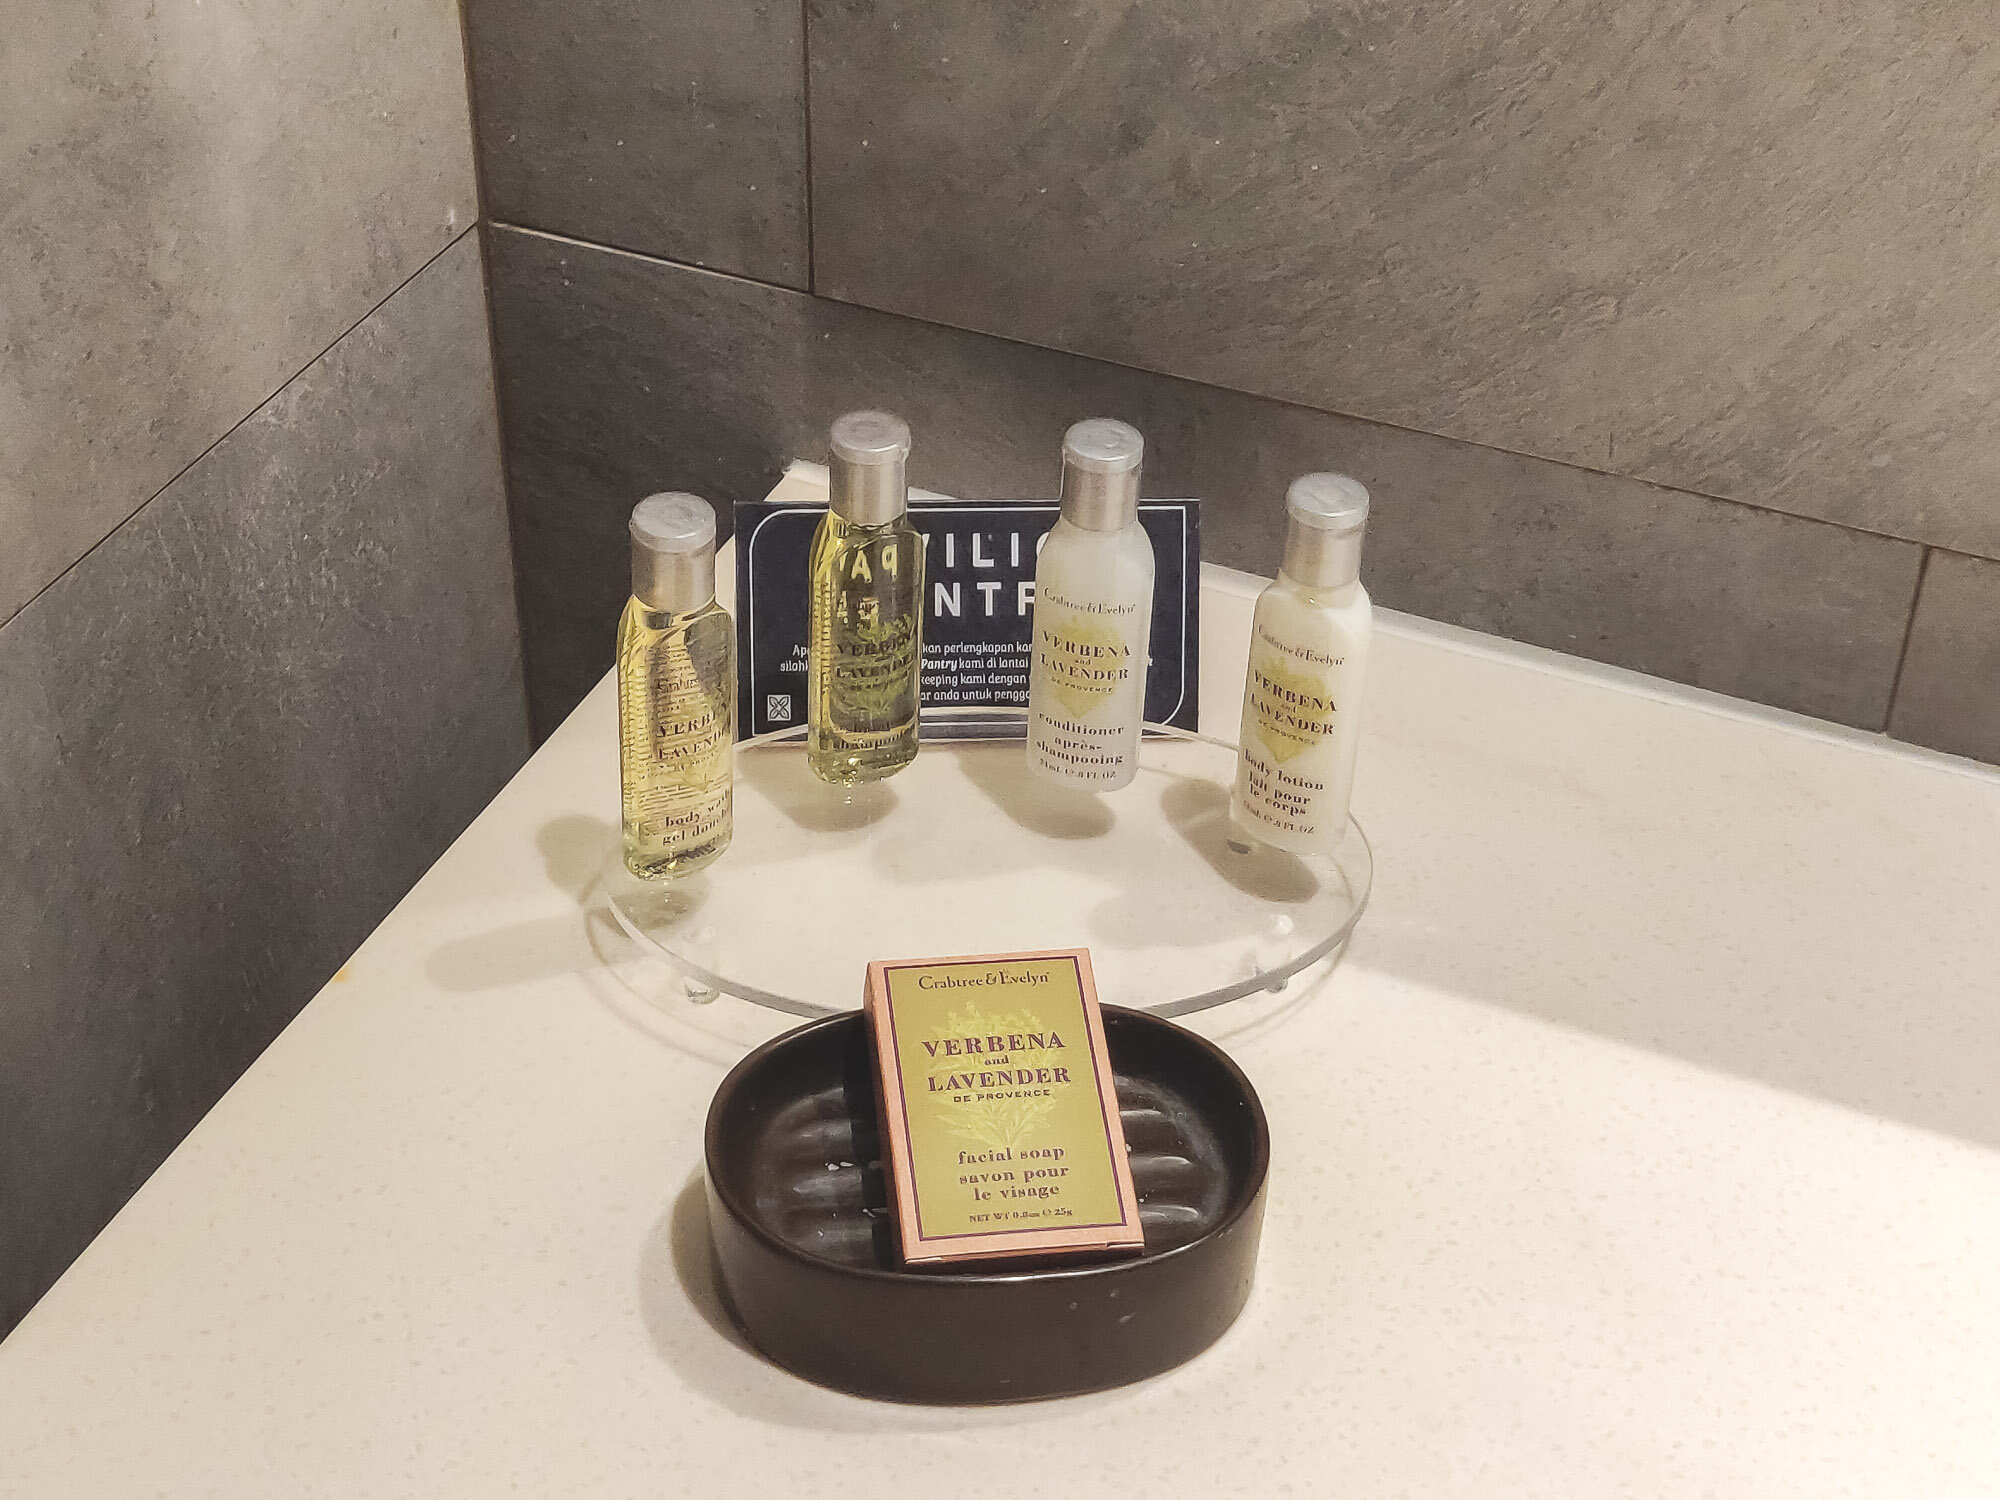 Crabtree & Evelyn toiletries